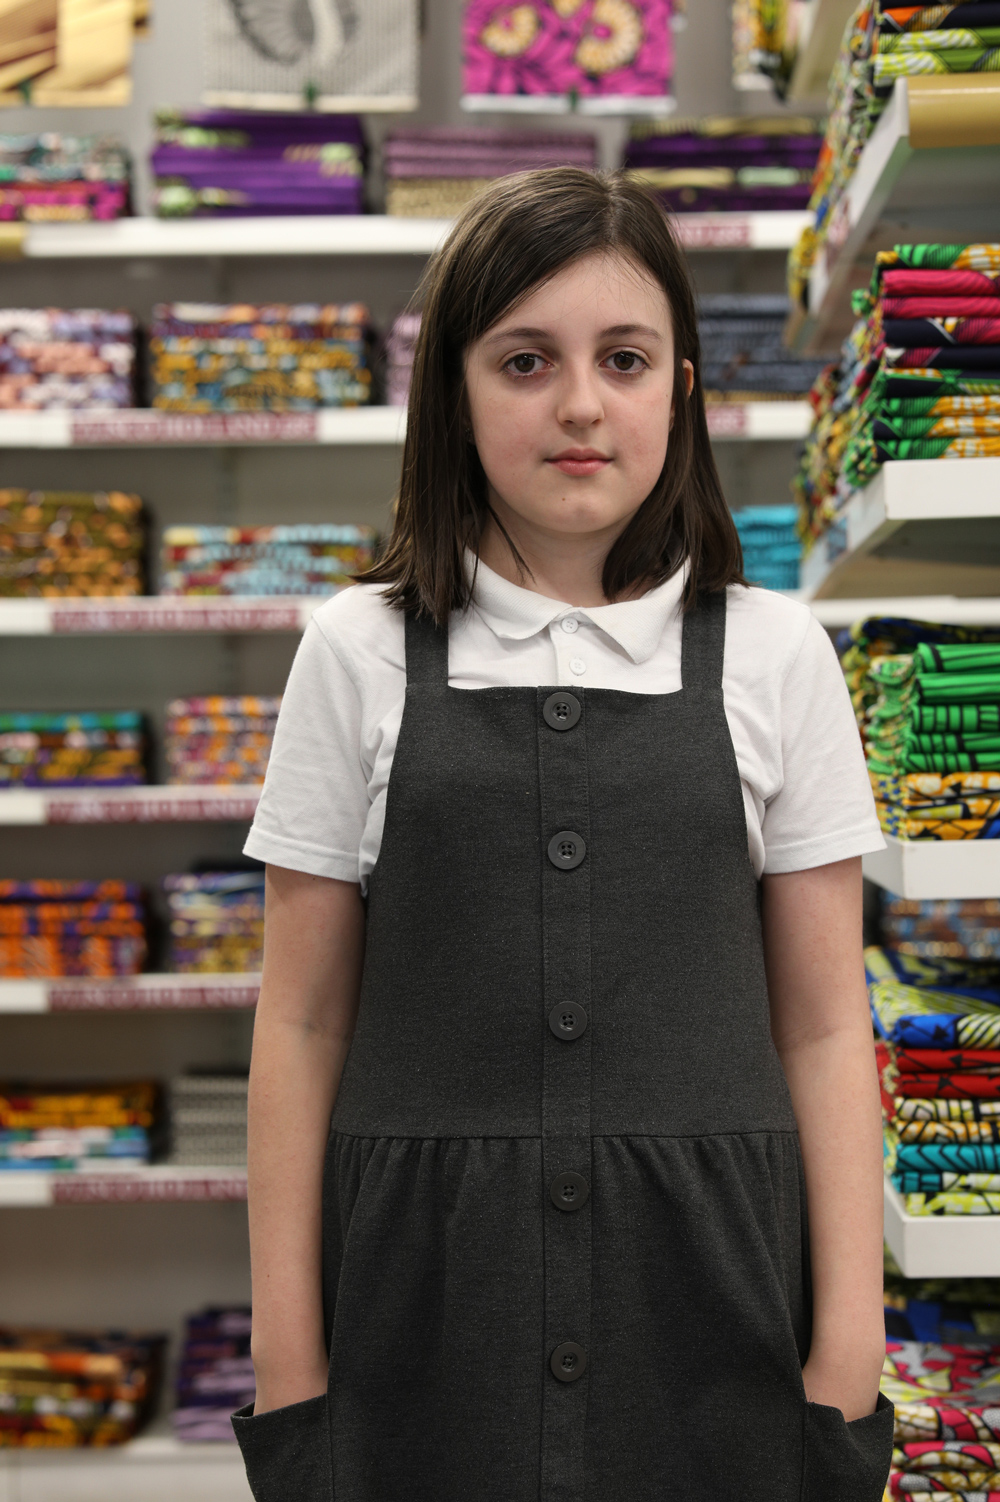 Portrait of a girl in school uniform standing in front of shelves of folded fabrics.